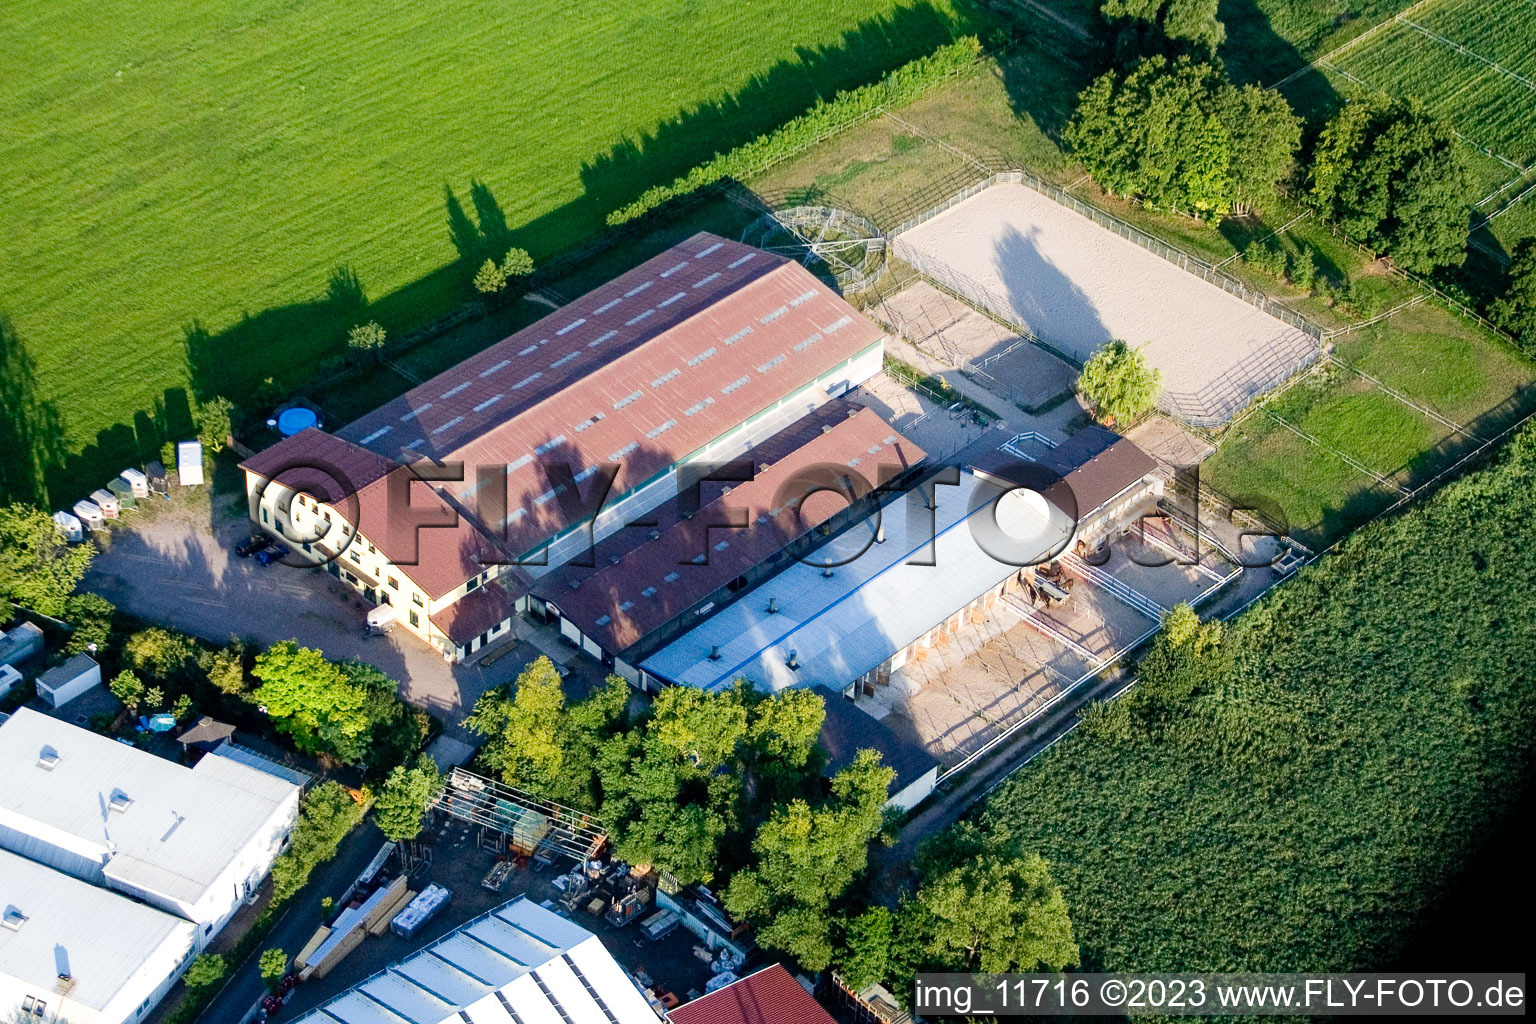 Aerial photograpy of Horse farm in the district Minderslachen in Kandel in the state Rhineland-Palatinate, Germany